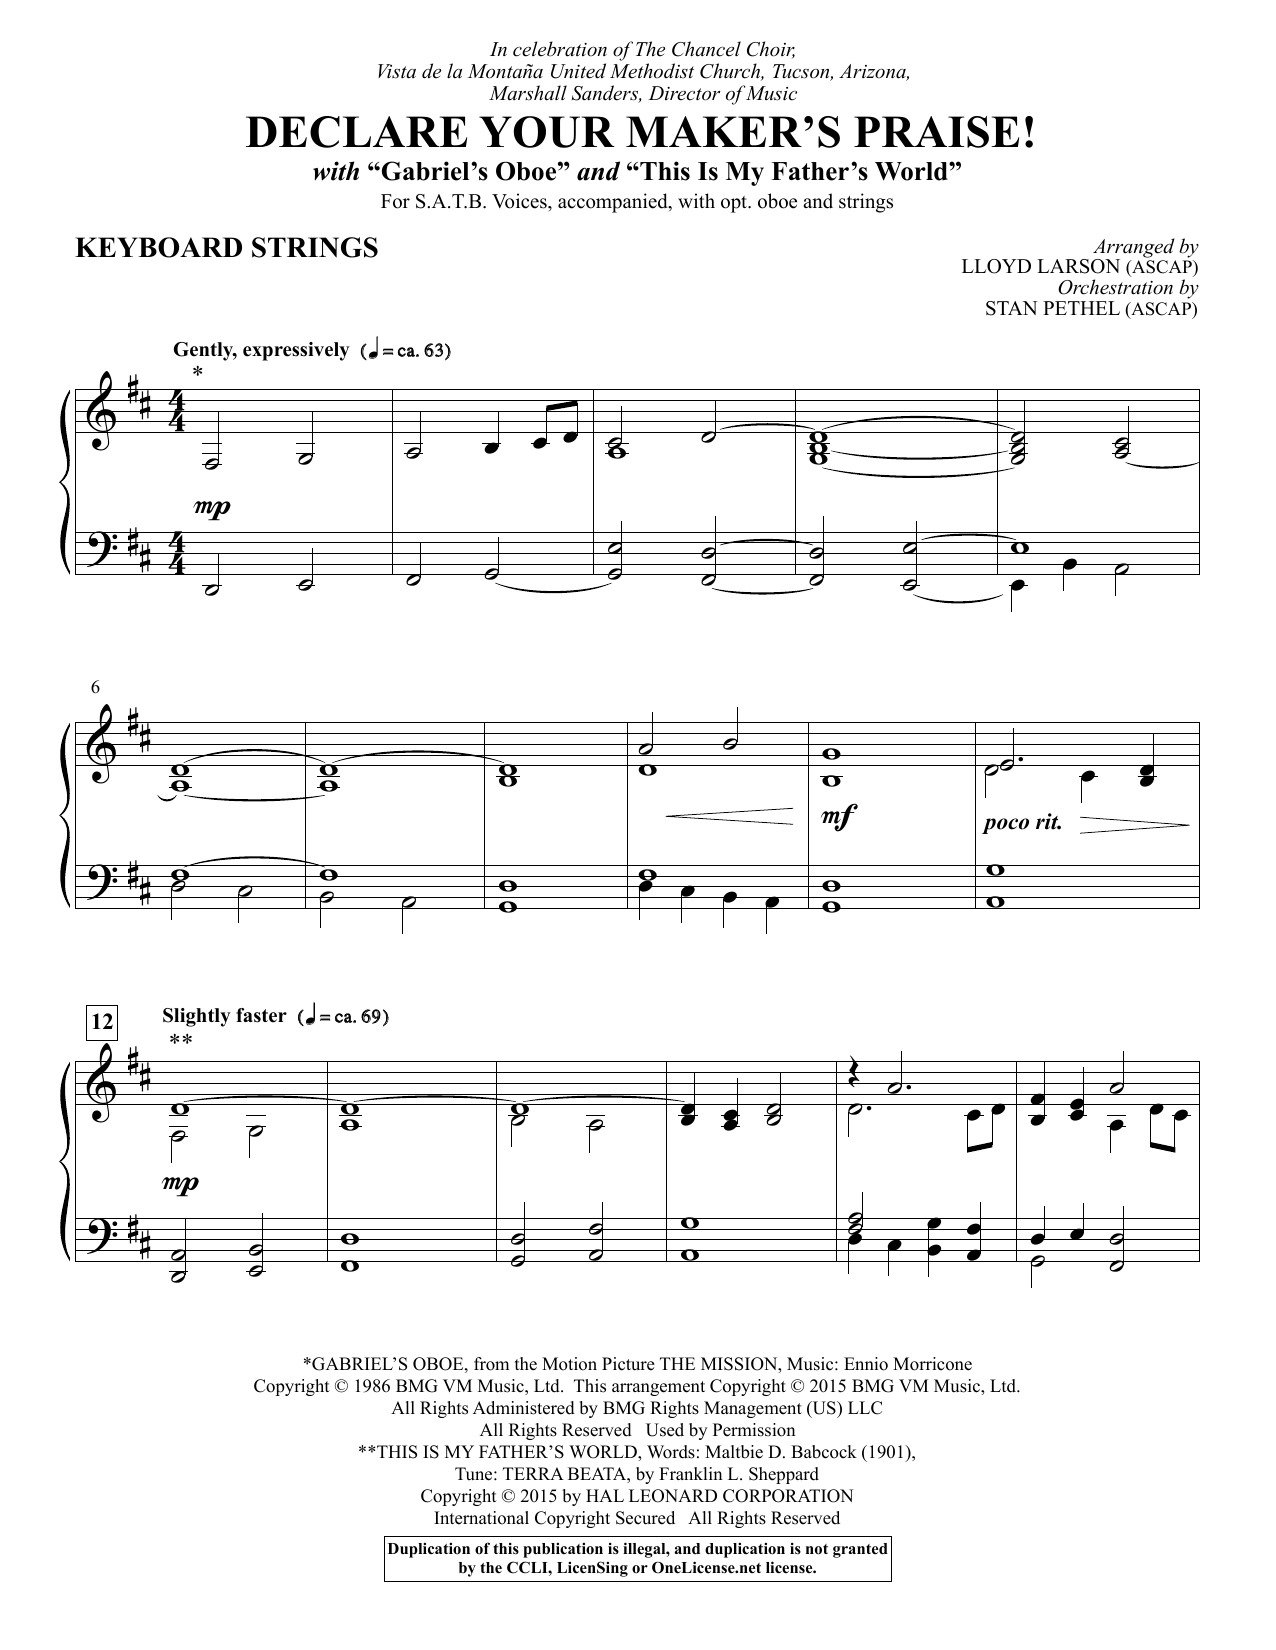 Lloyd Larson Declare Your Maker's Praise! - Keyboard String Reduction sheet music notes and chords. Download Printable PDF.